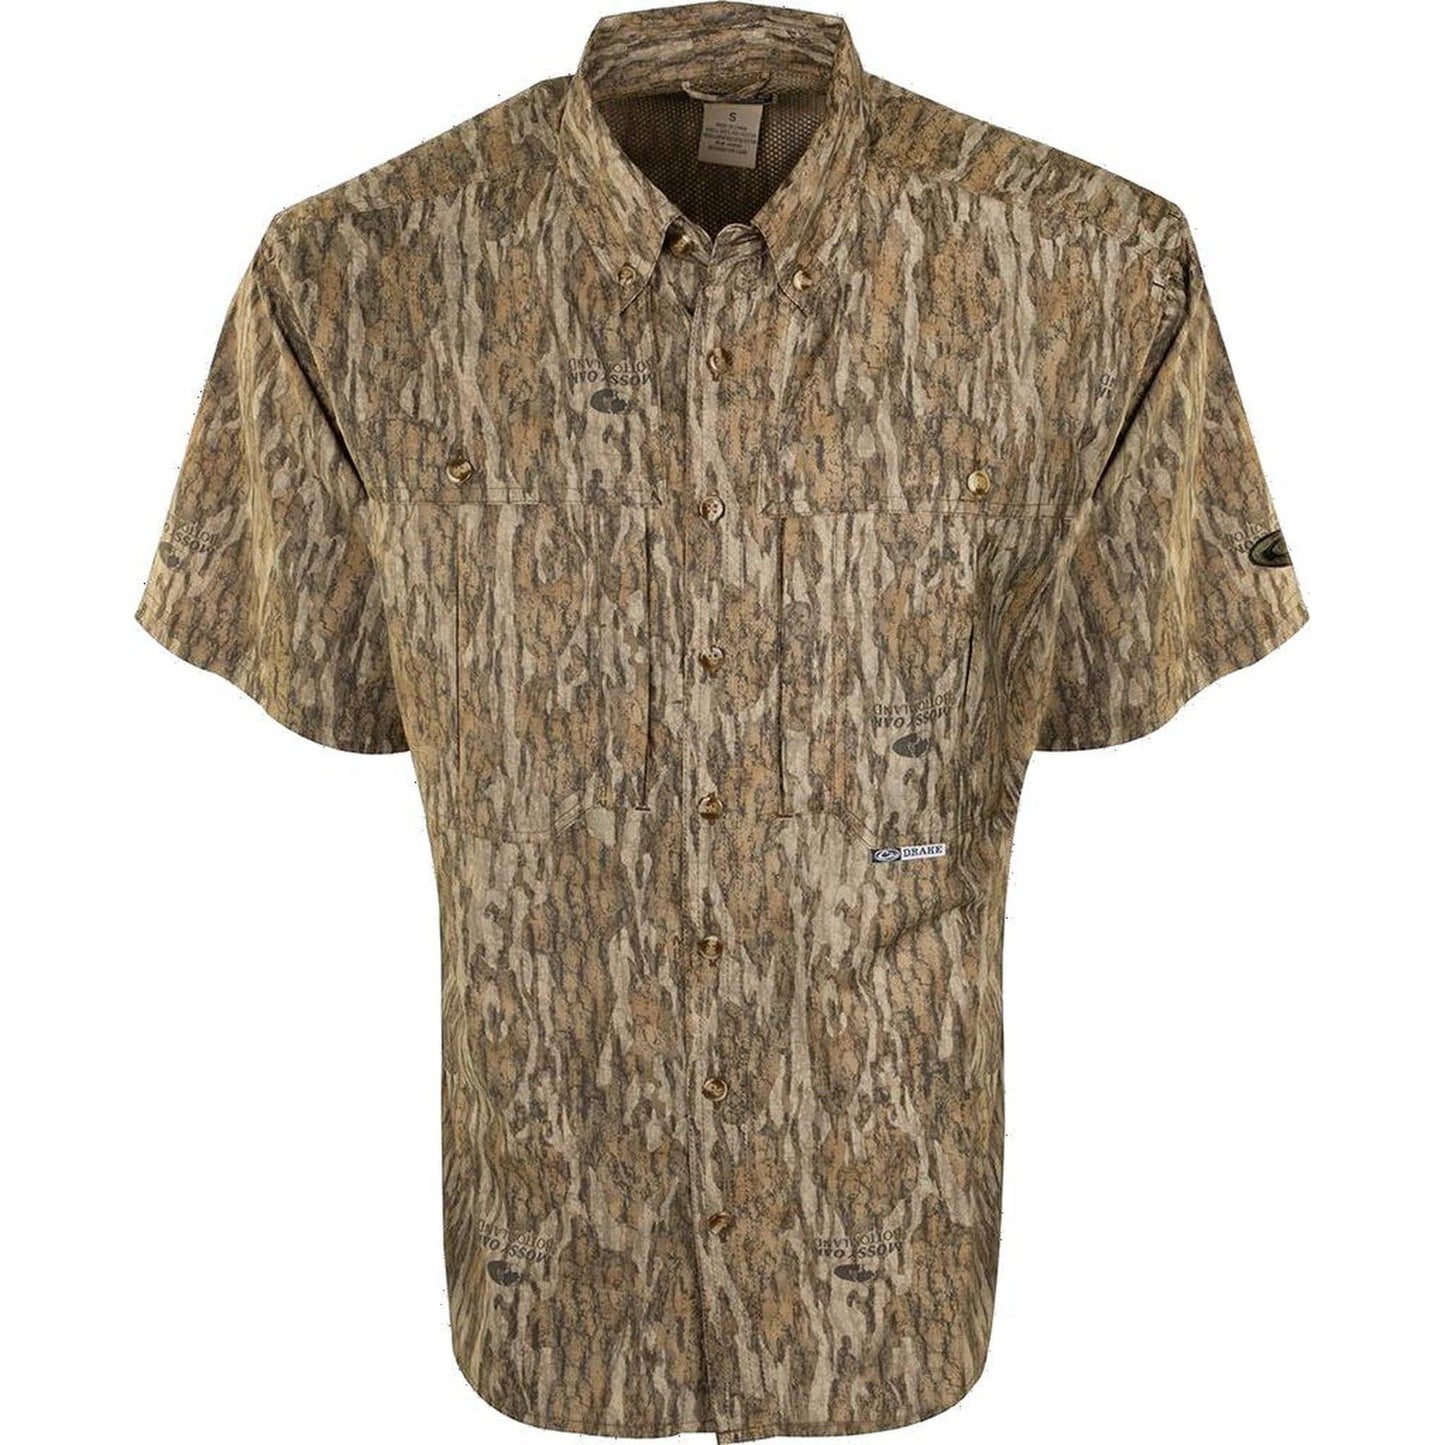 Drake Vented Wing Shooters Shirt Short Sleeve Camo by Texas Fowlers